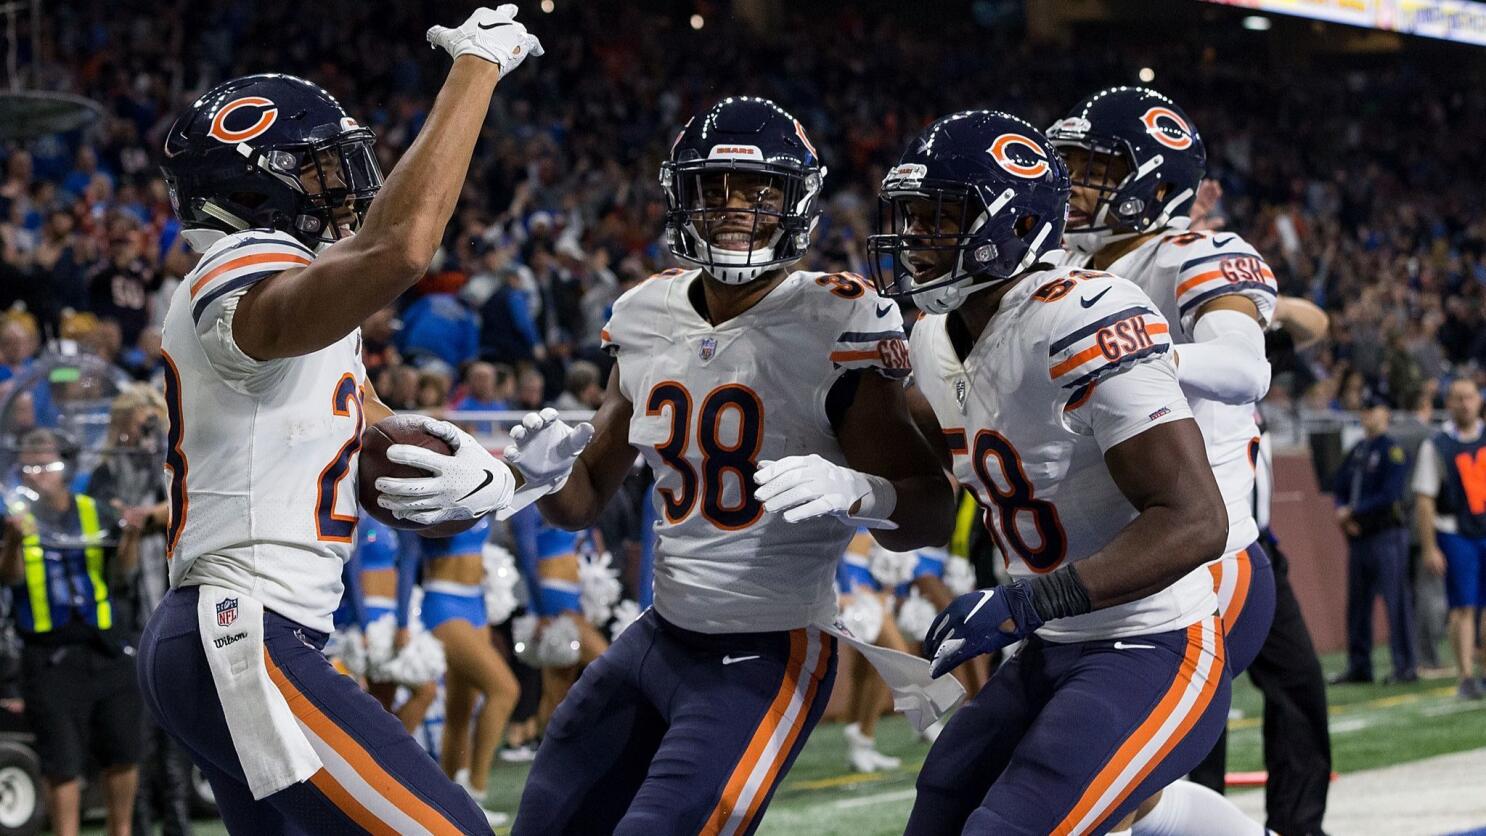 Bears beat Lions 23-16 in Thanksgiving Day opener - Los Angeles Times